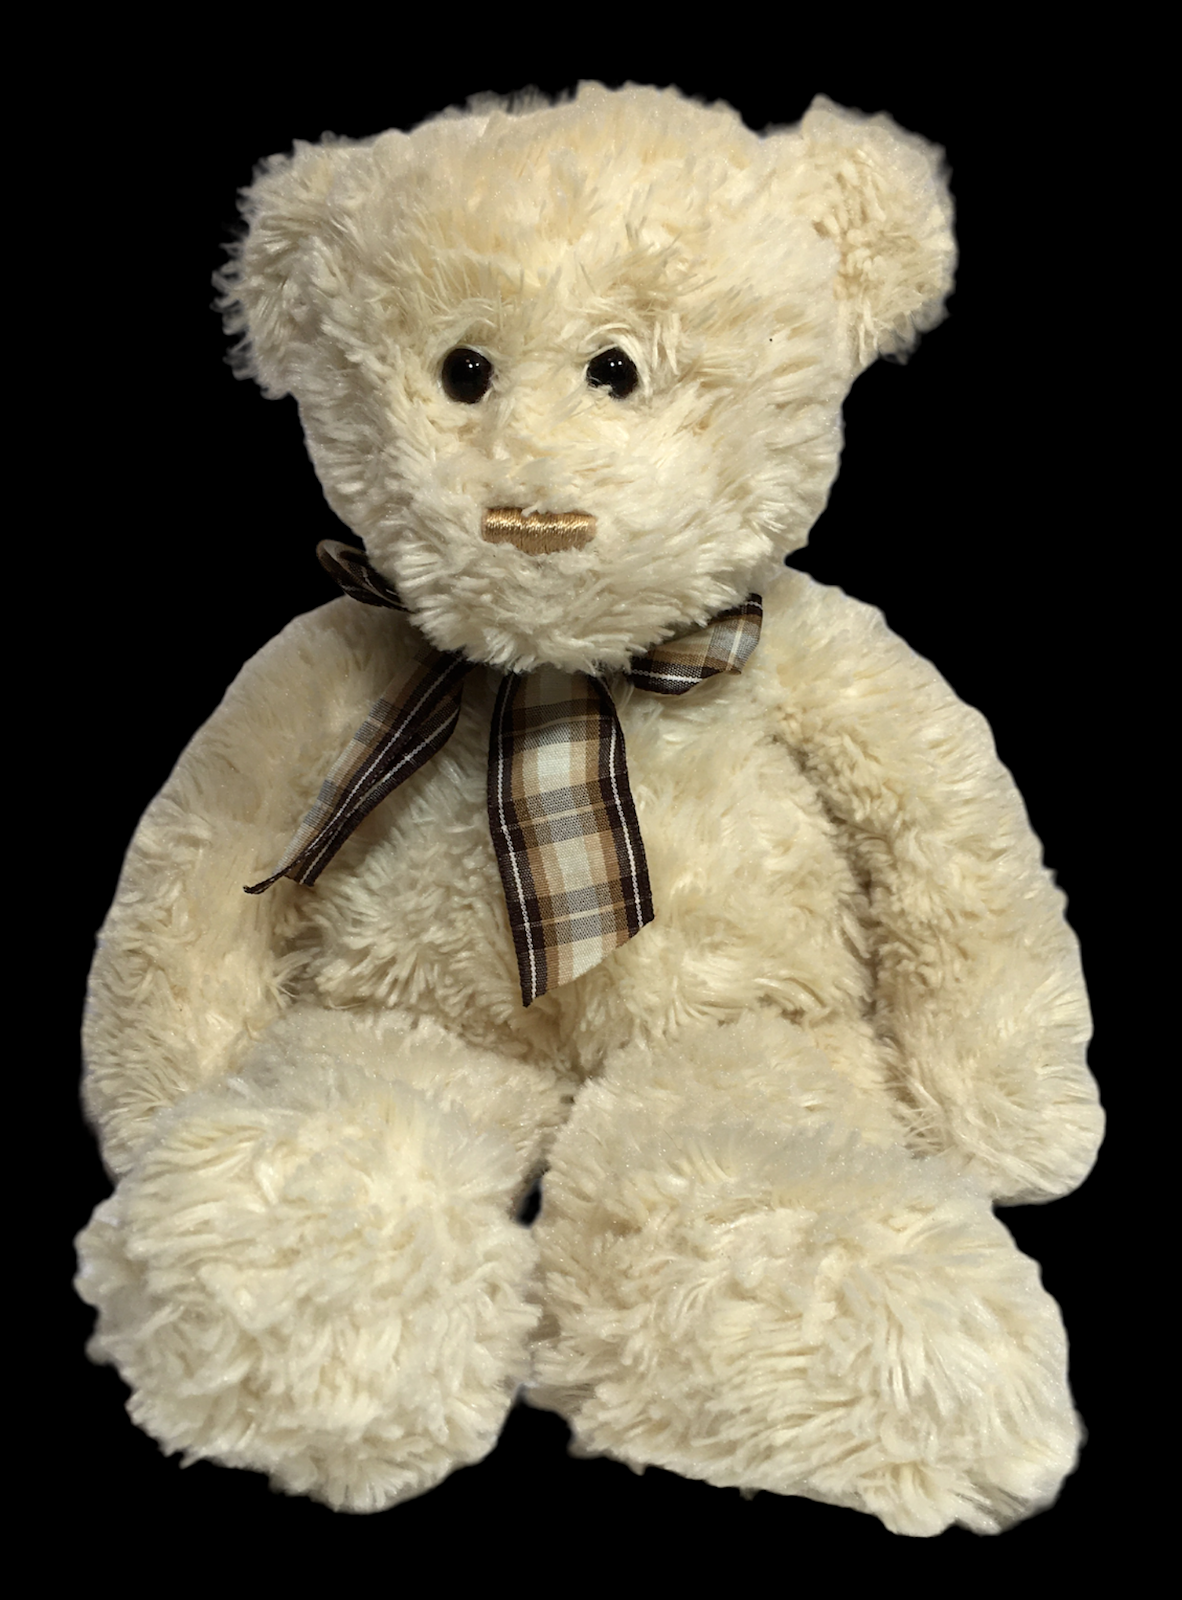 Primary image for Ty Classic Charisse Ivory Cream Teddy Bear 2006 Beanbag Plush Plaid Bow RARE HTF